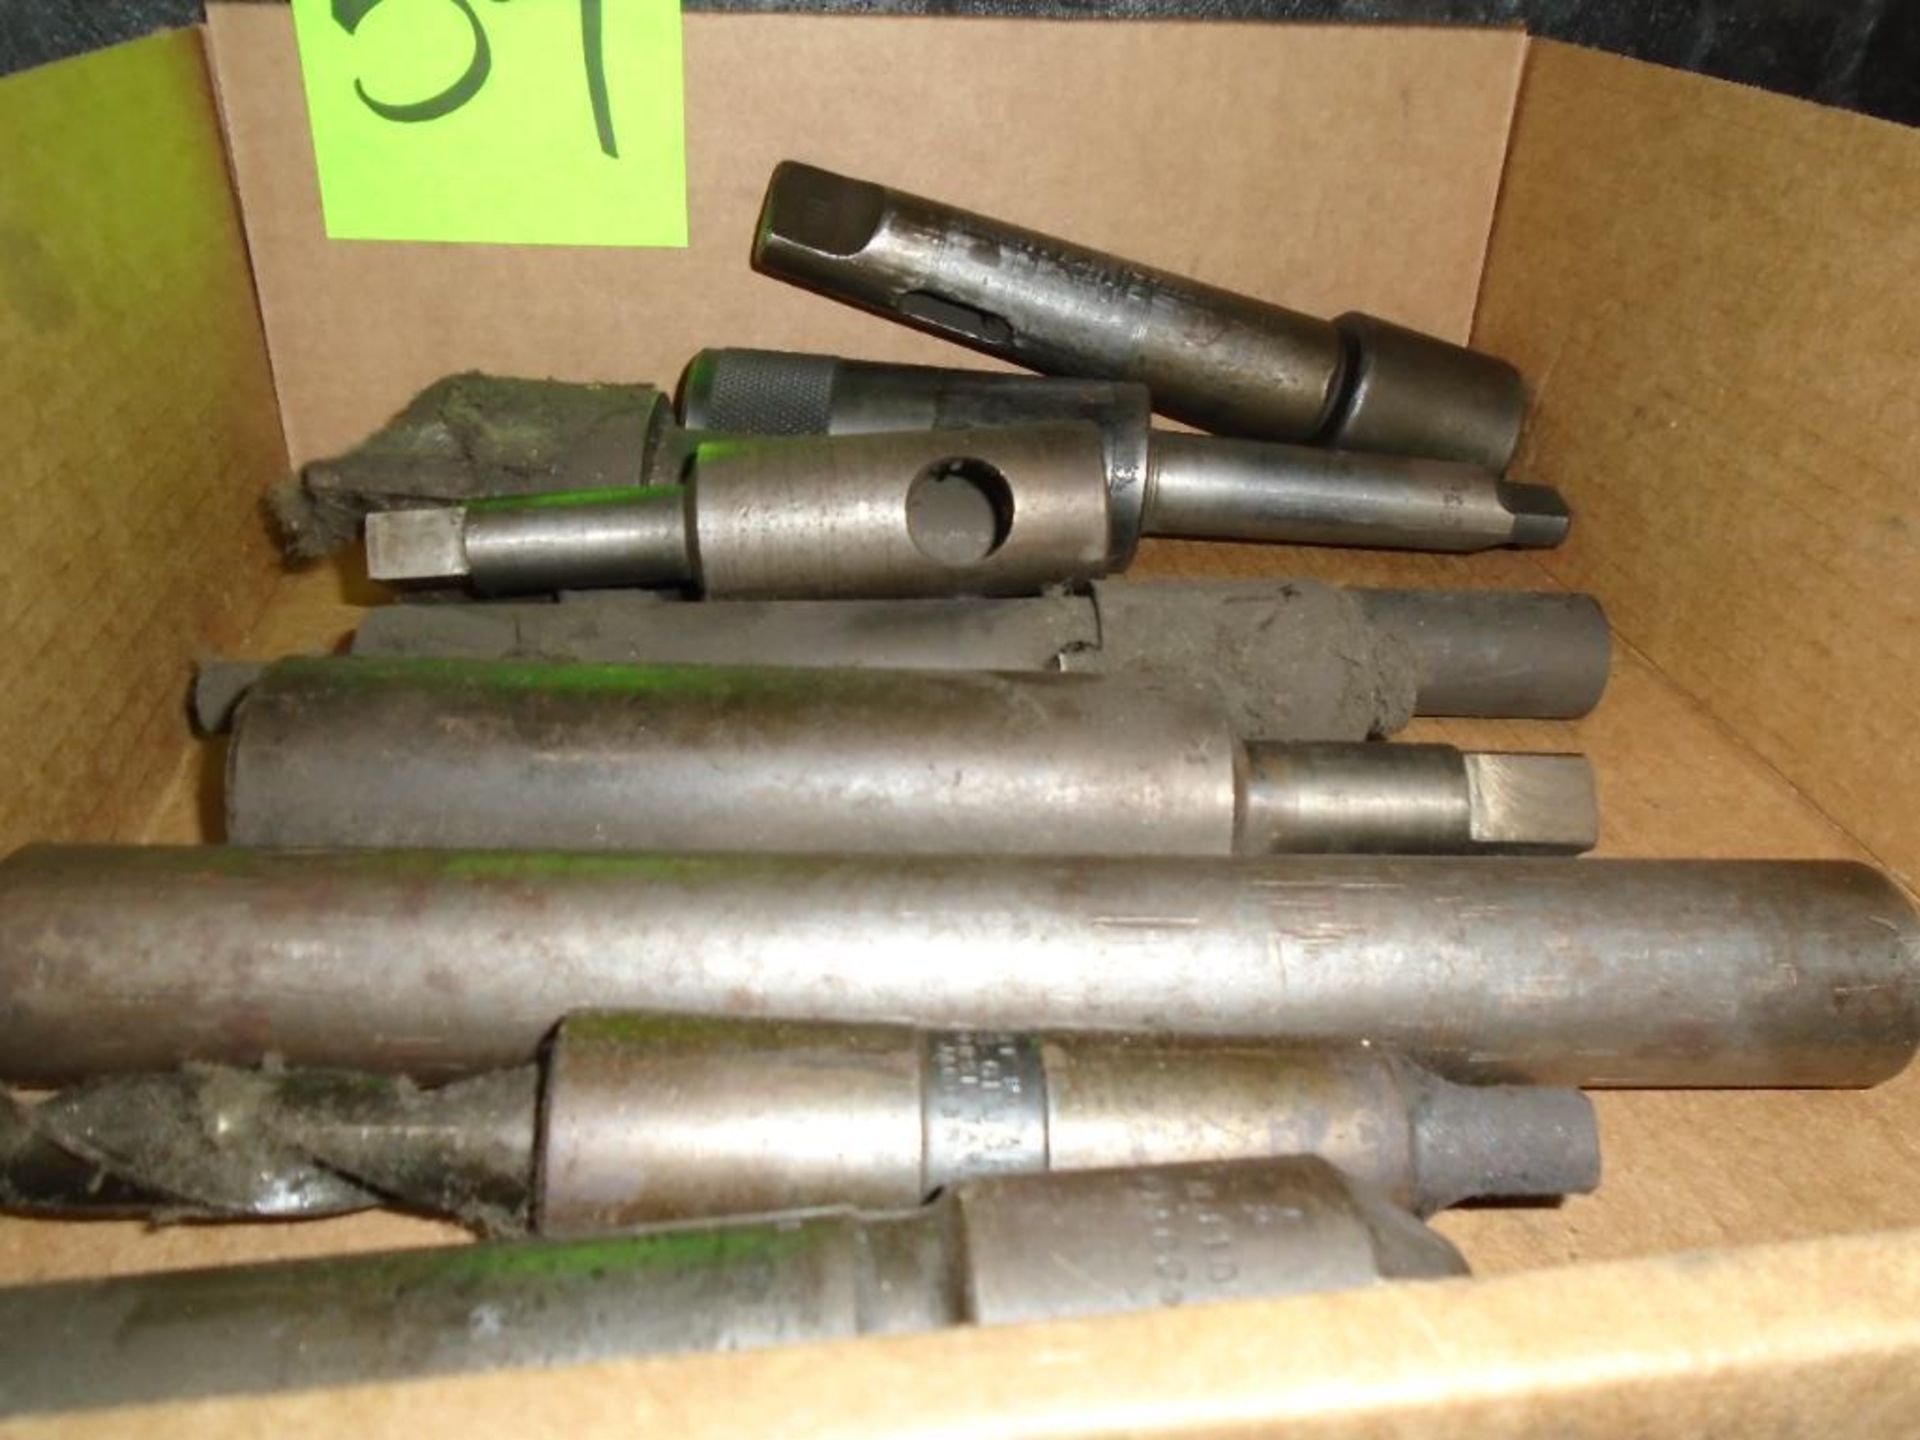 Lot of Assorted Boring Bars & Tooling Holders - Image 2 of 2